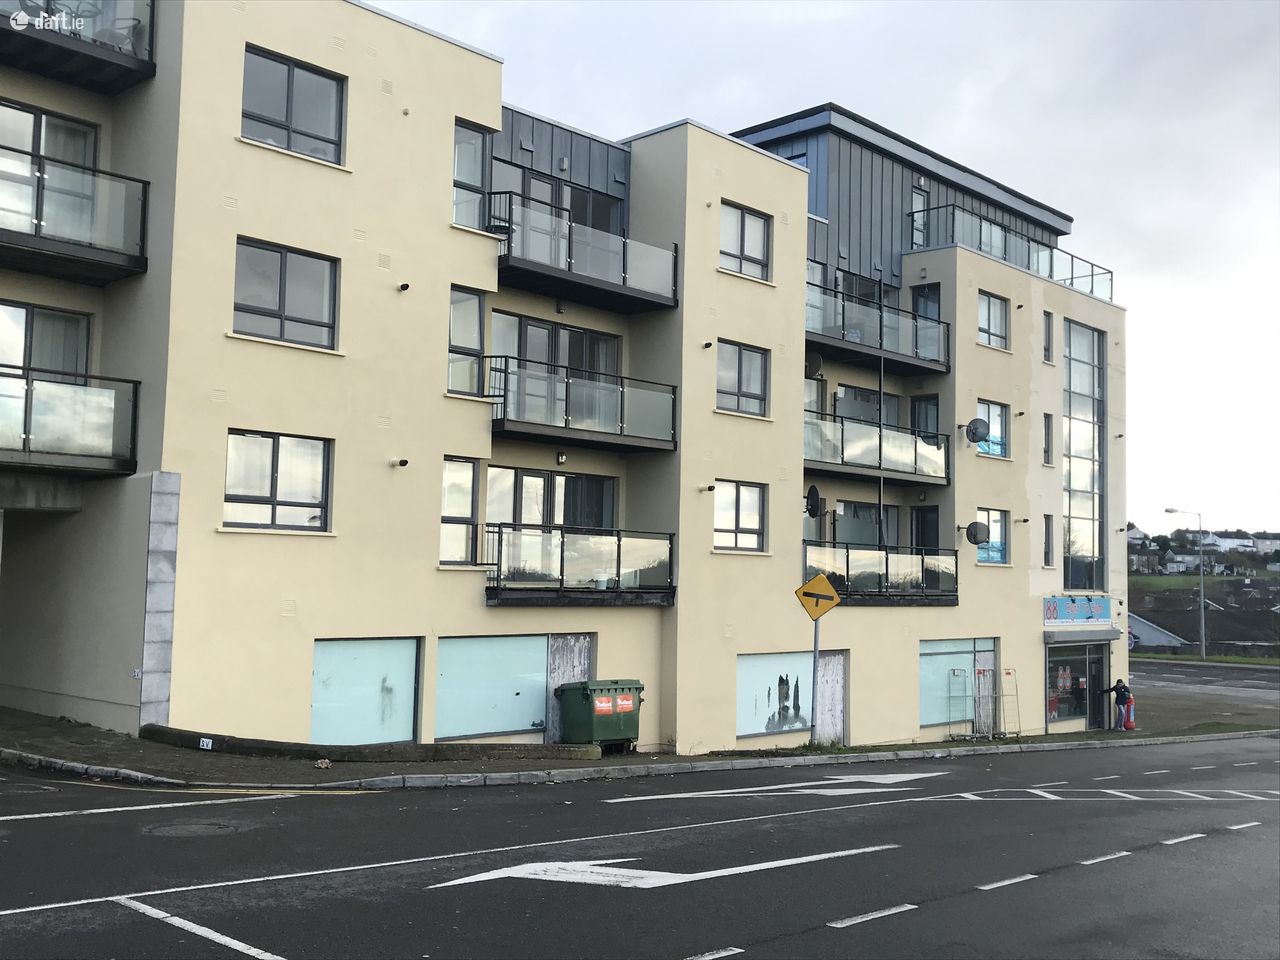 Units 1,2,3,6,7 & 8, Mount Suir Manor, Gracedieu, Waterford City, Co. Waterford